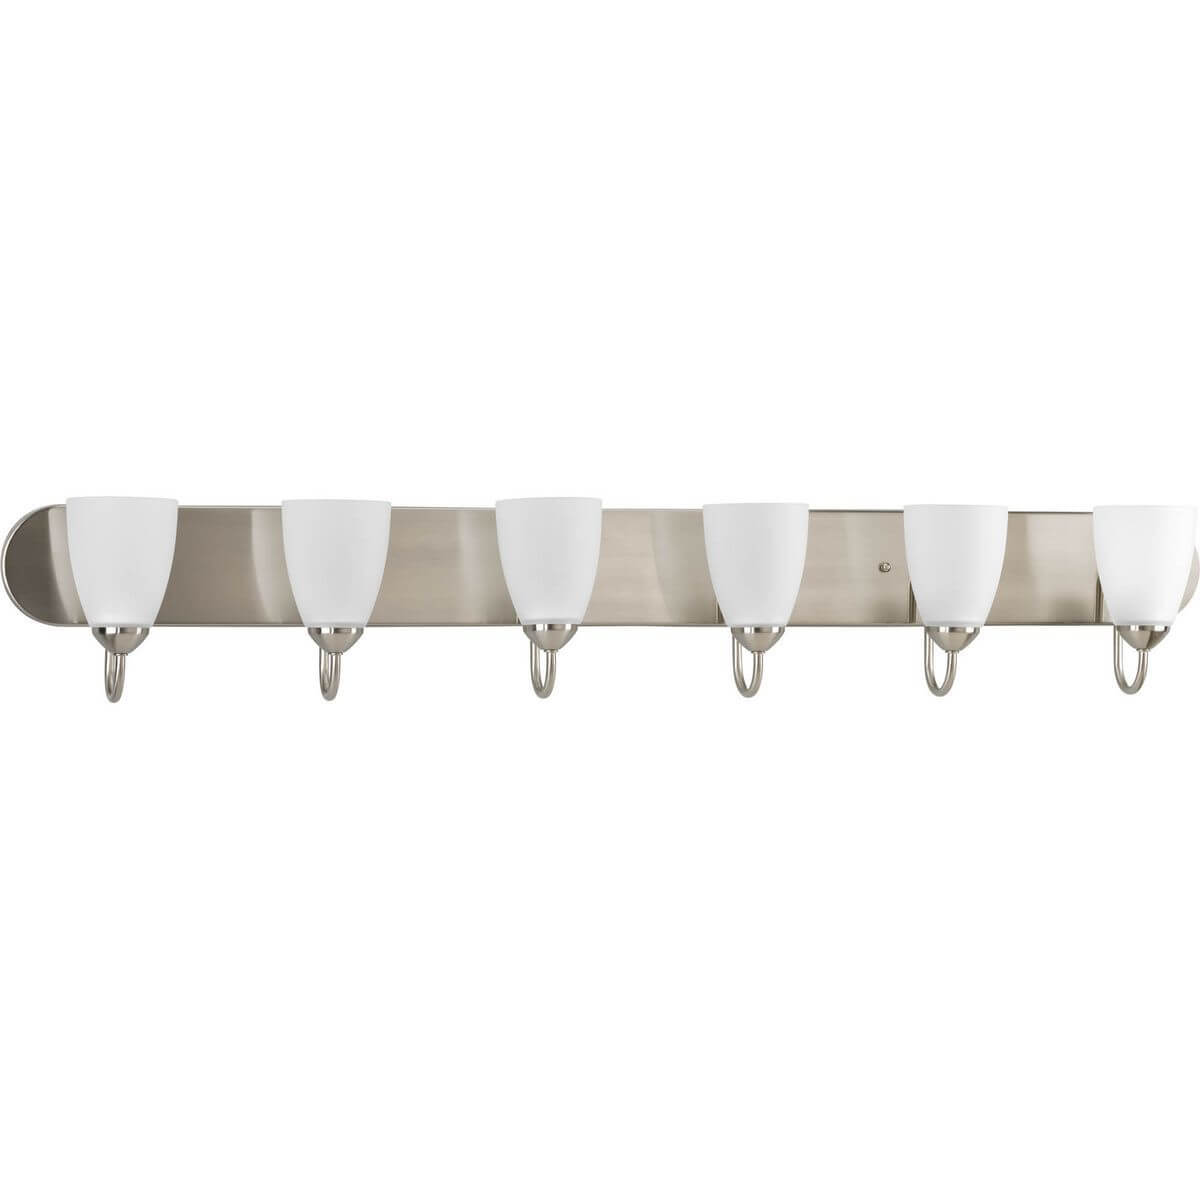 Progress Lighting Gather 6 Light 48 inch Bath Vanity Light in Brushed Nickel with Etched Glass P2714-09